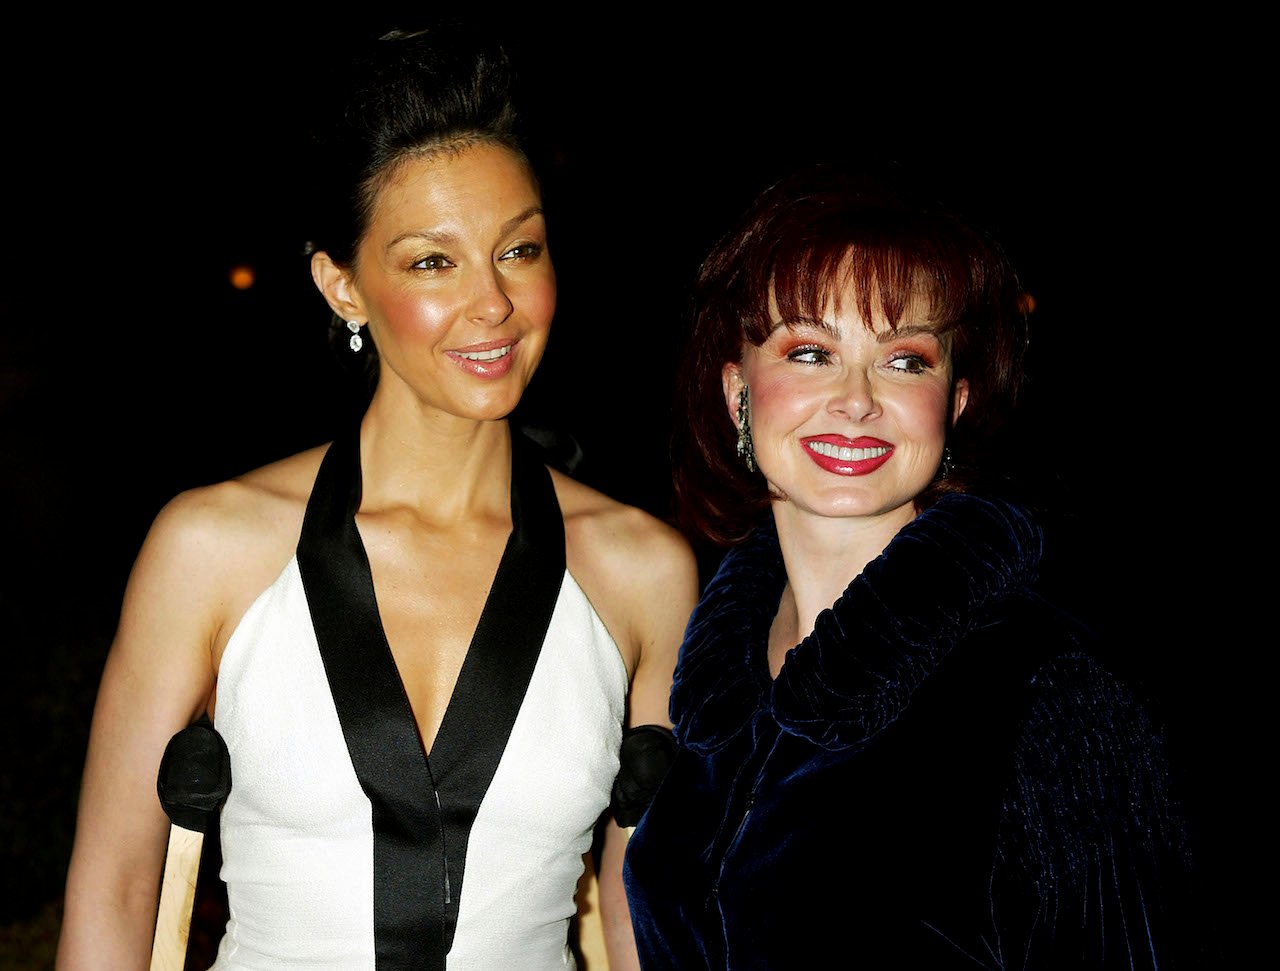 Naomi Judd supported Ashley Judd in coming forward with allegations against Harvey Weinstein